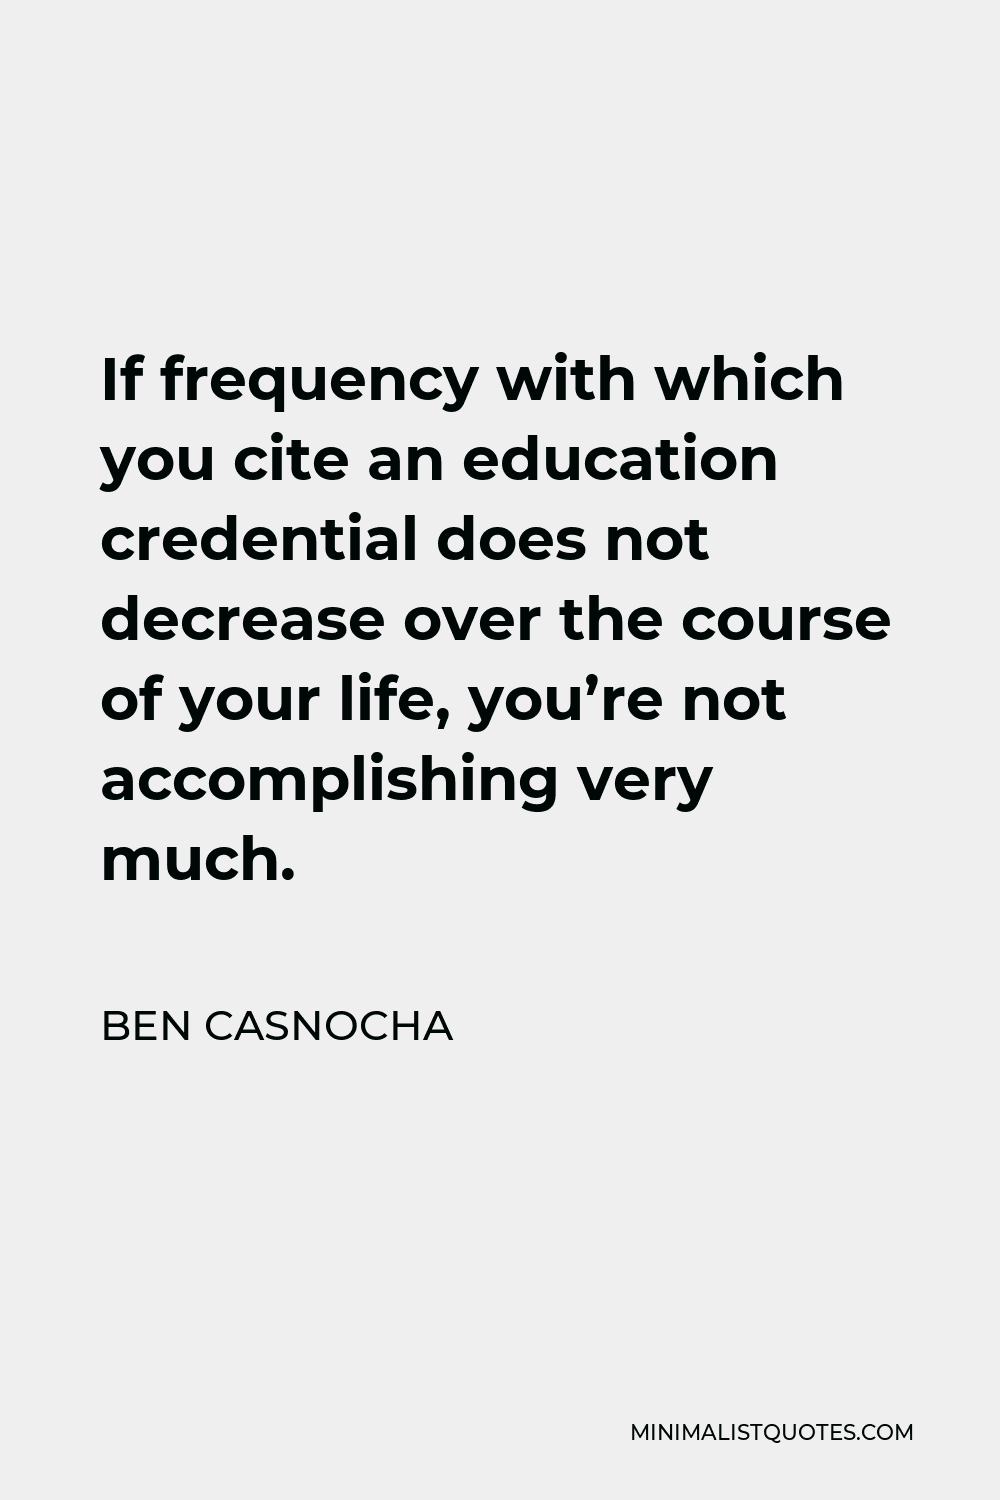 Ben Casnocha Quote - If frequency with which you cite an education credential does not decrease over the course of your life, you’re not accomplishing very much.